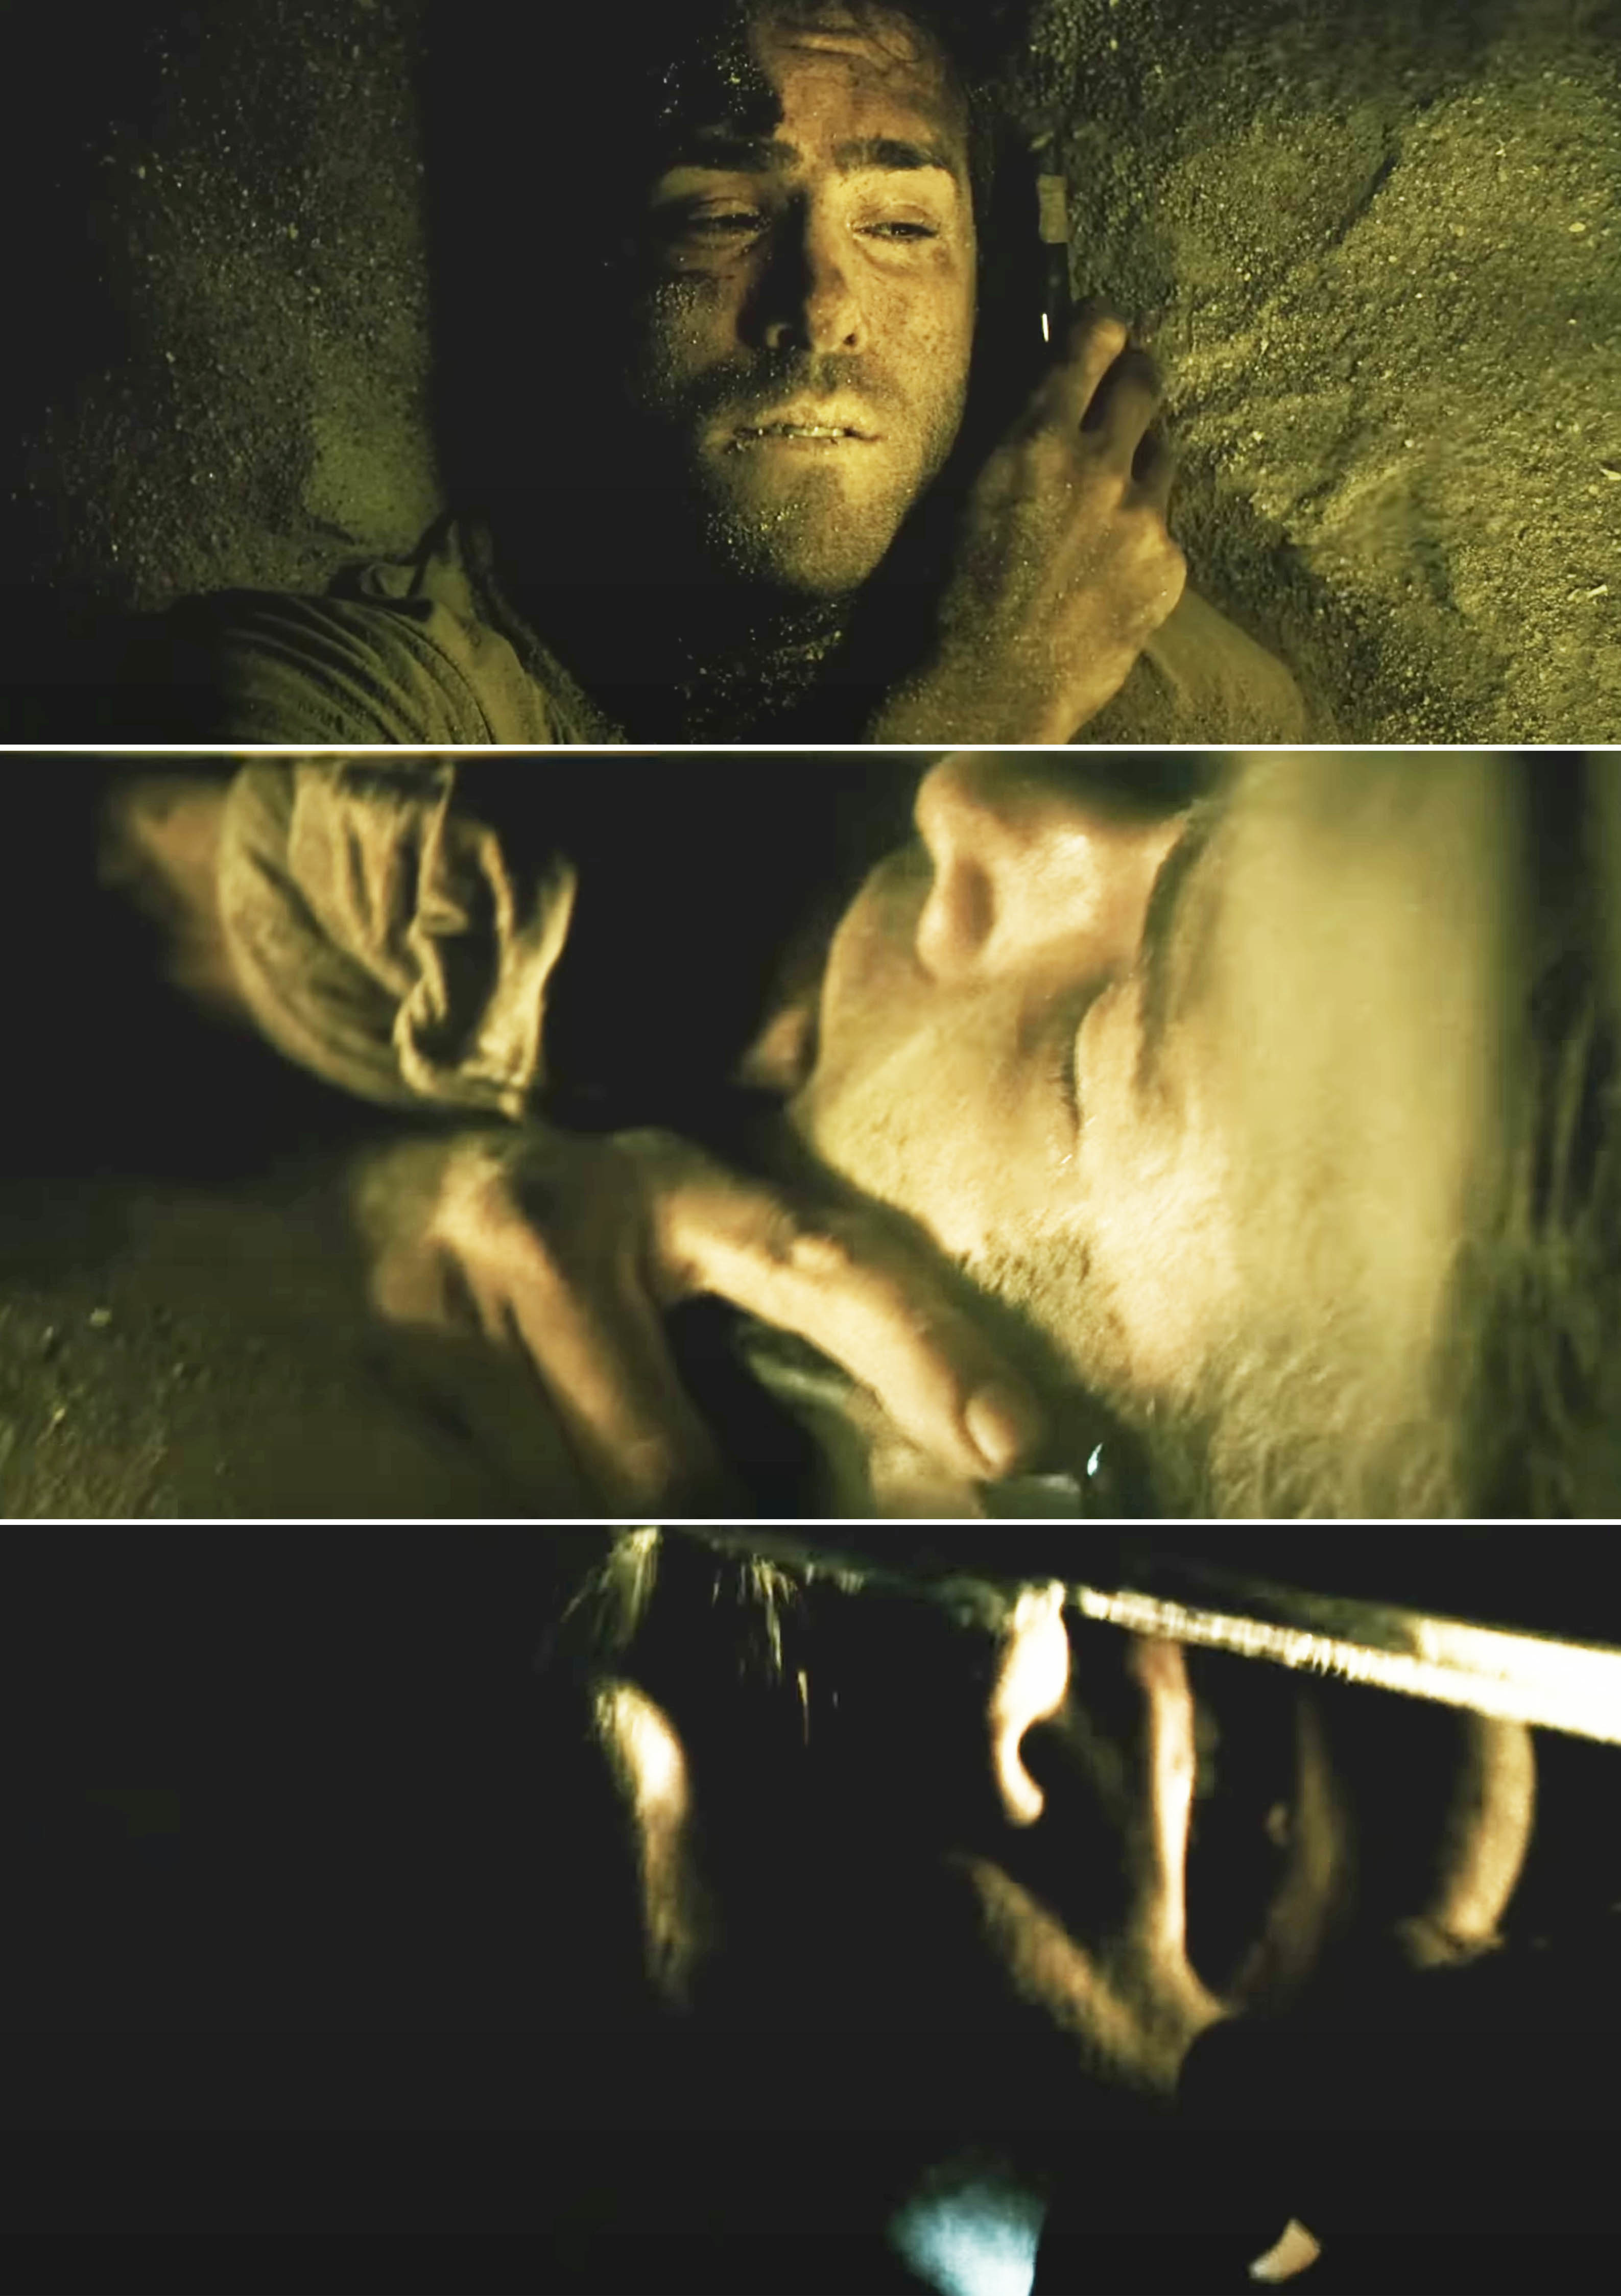 Three scenes from &quot;Buried&quot; with Ryan Reynolds showing his character trapped in a coffin